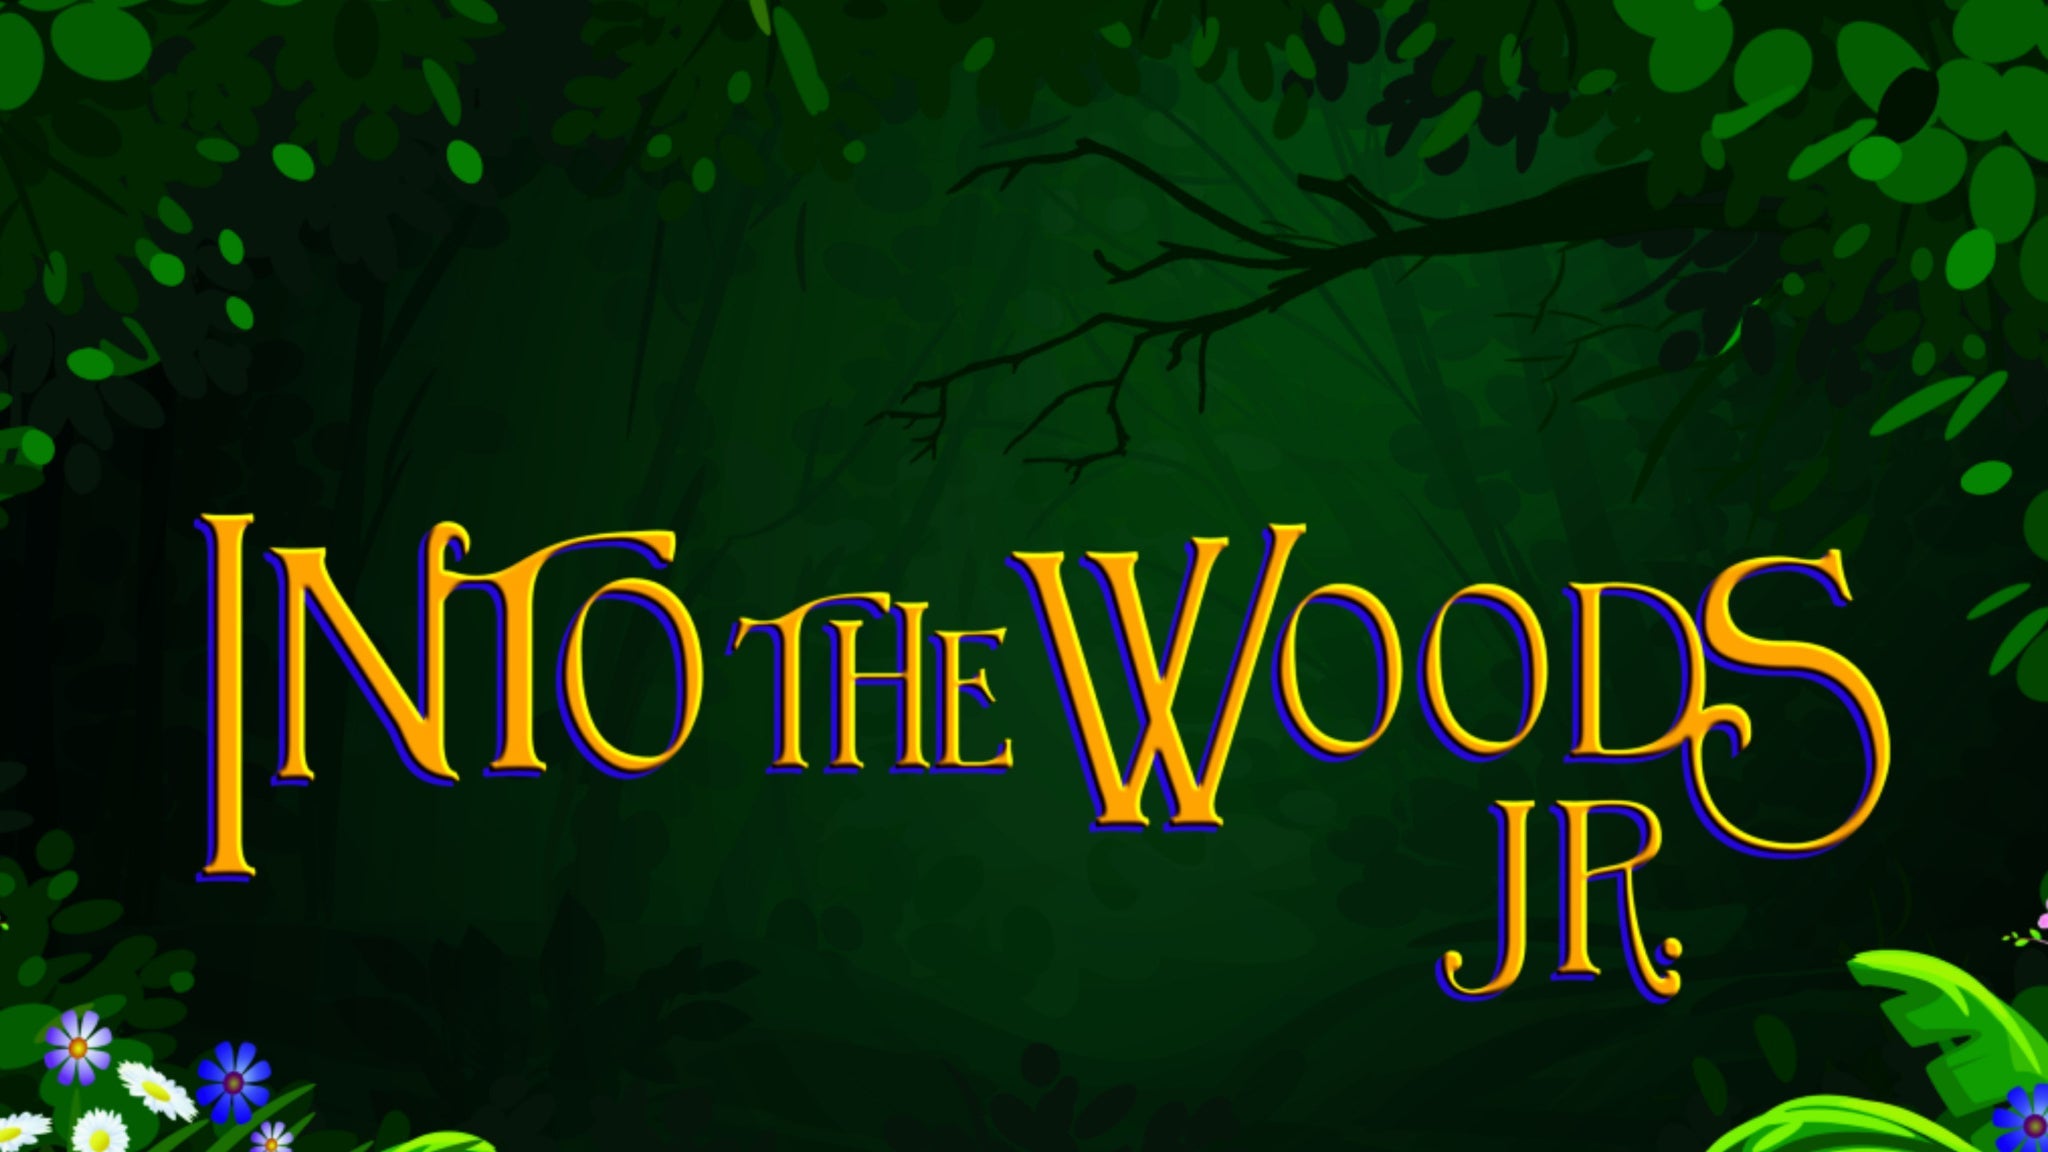 Into the Woods, Jr. presale code for show tickets in Hagerstown, MD (The Maryland Theatre)